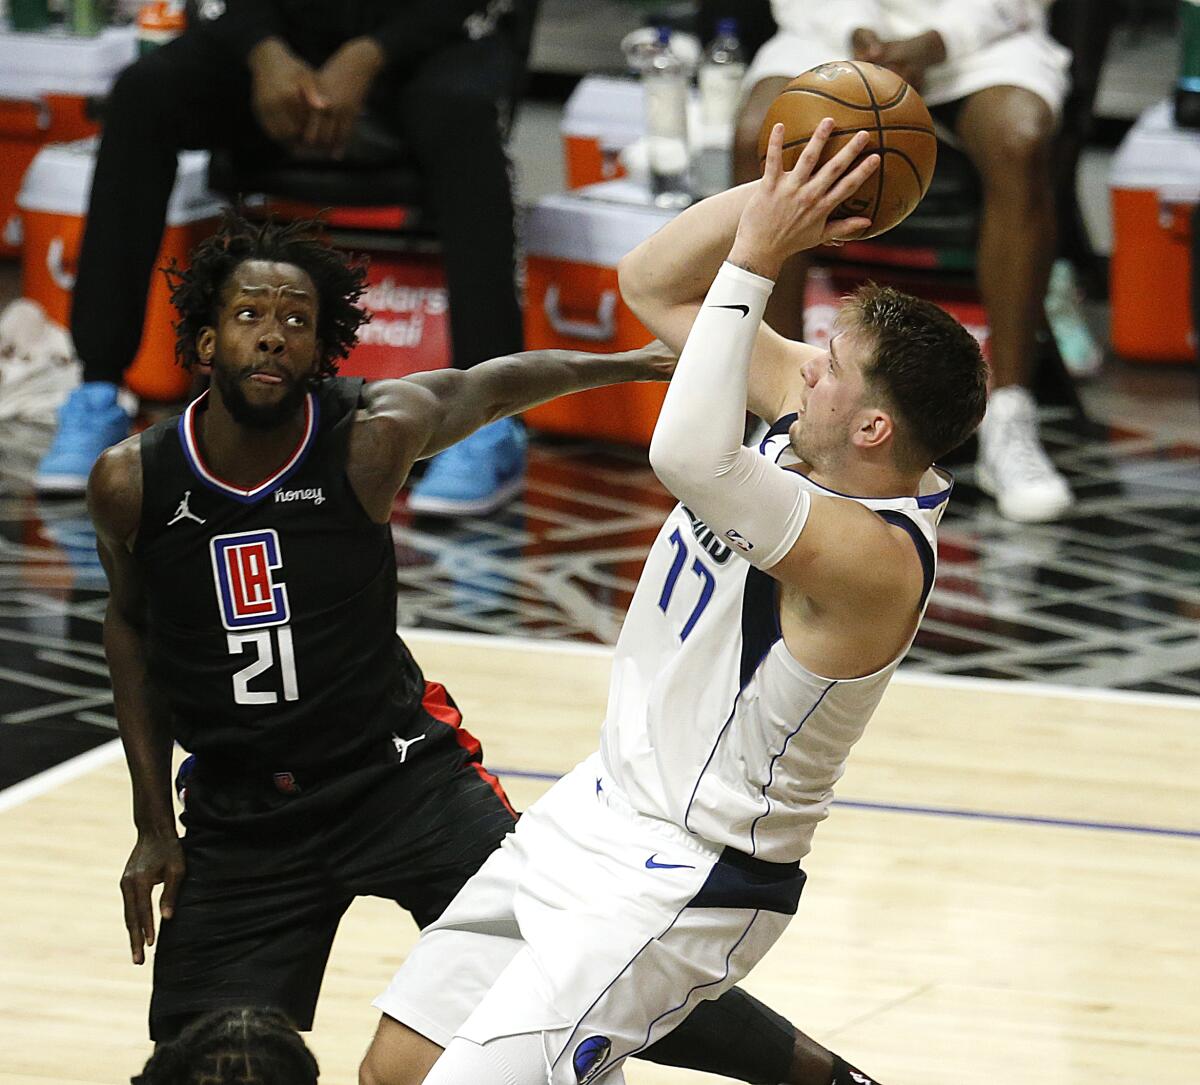 Dallas Mavericks guard Luka Doncic attempts a basket guarded by Clippers guard Patrick Beverley.